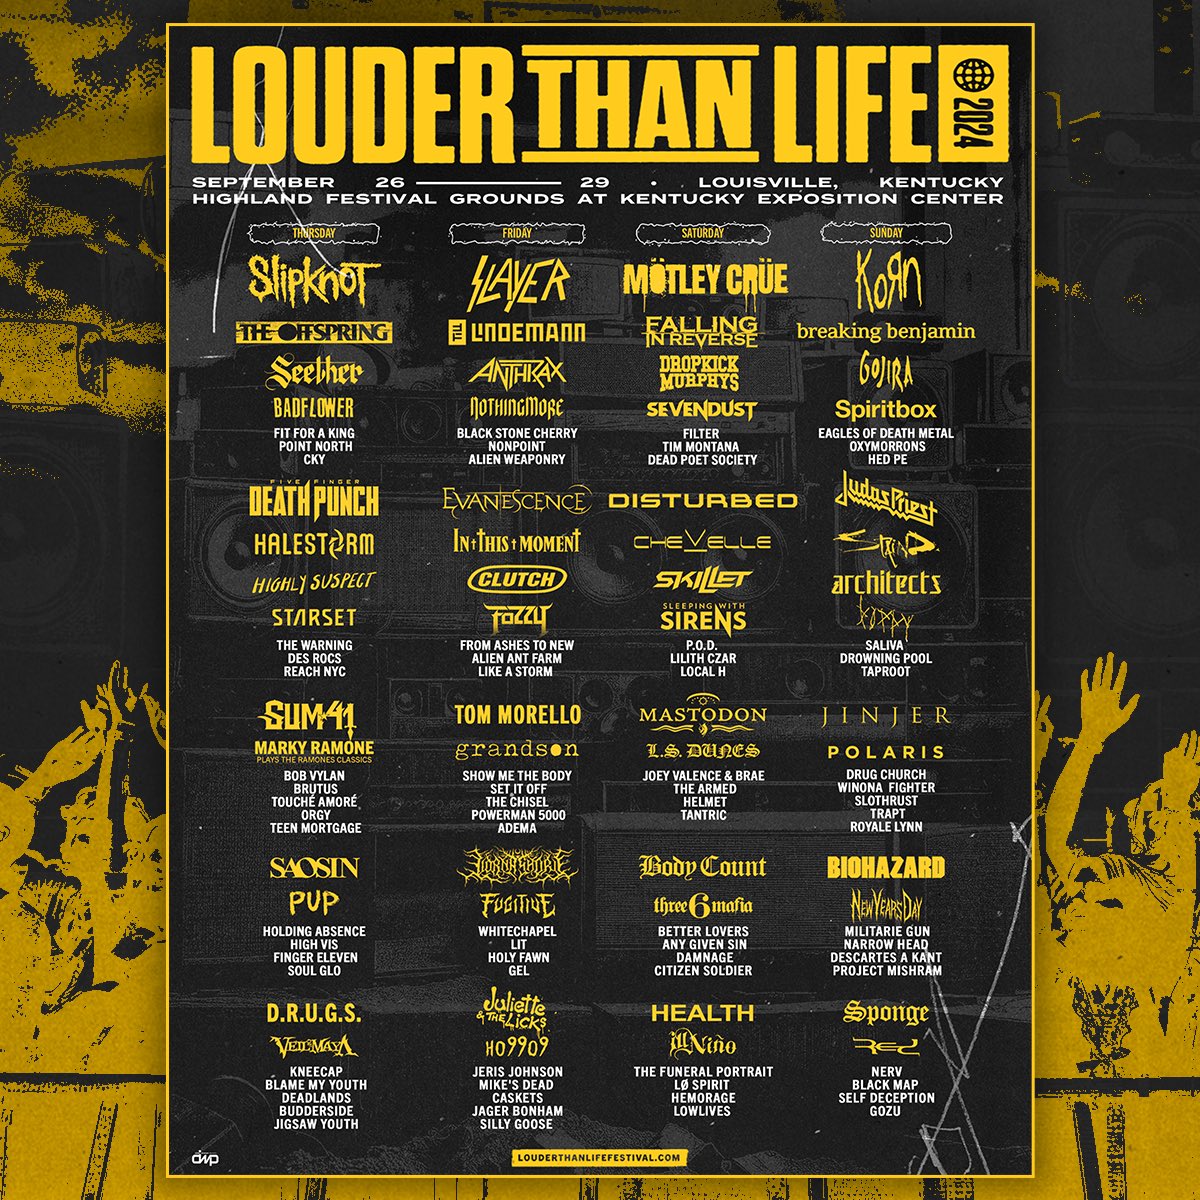 We’ll see you in Kentucky Saturday, Sep 28 for @LTLFest! Tickets & info at: louderthanlifefestival.com